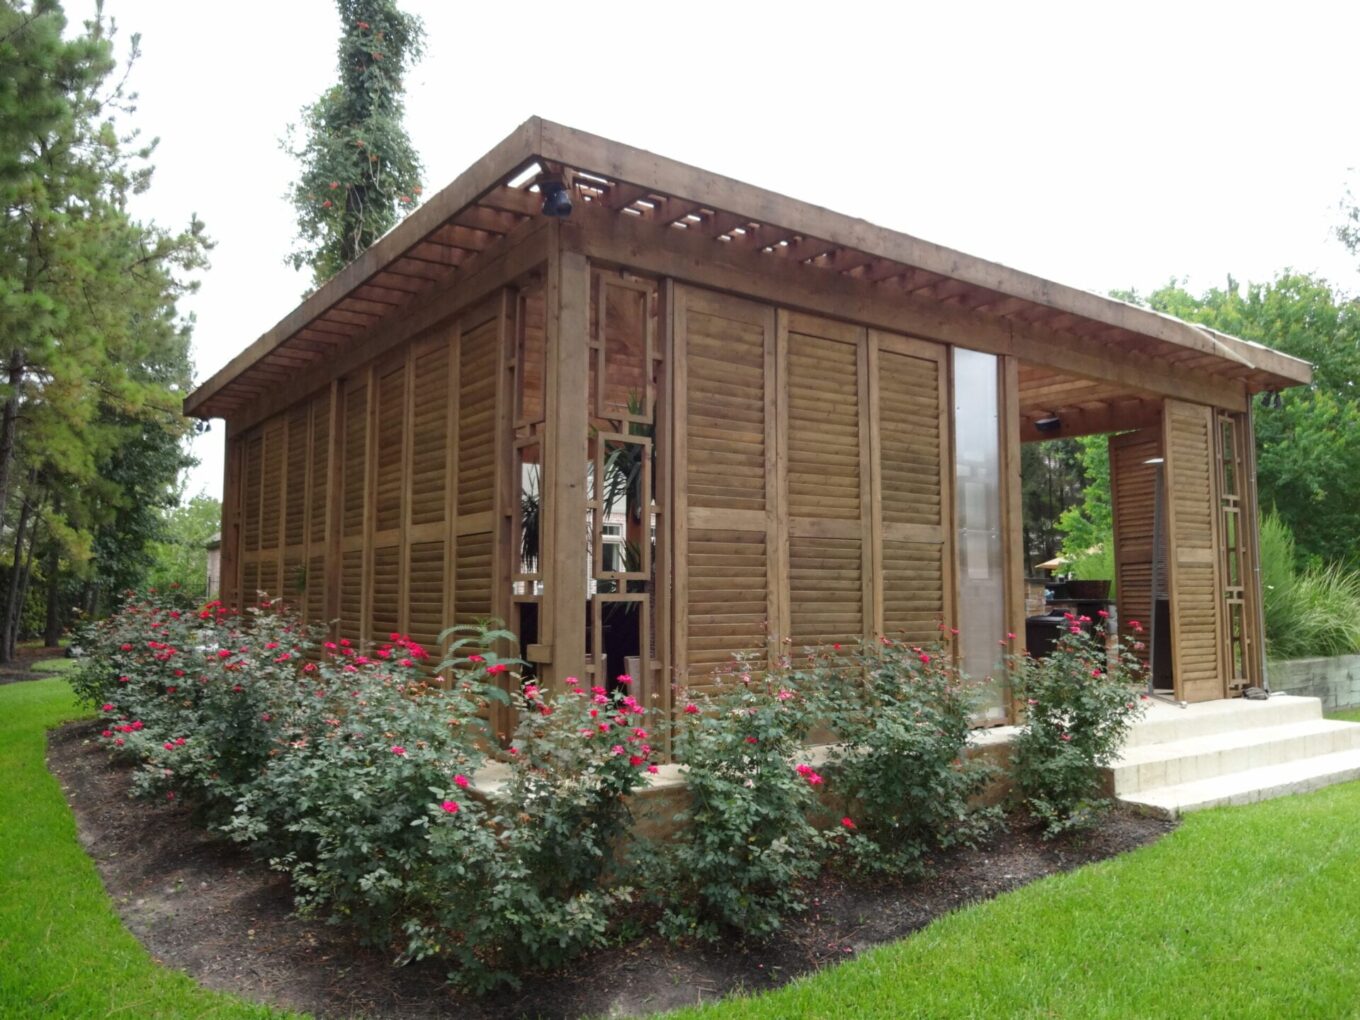 A wooden structure with a lot of privacy.